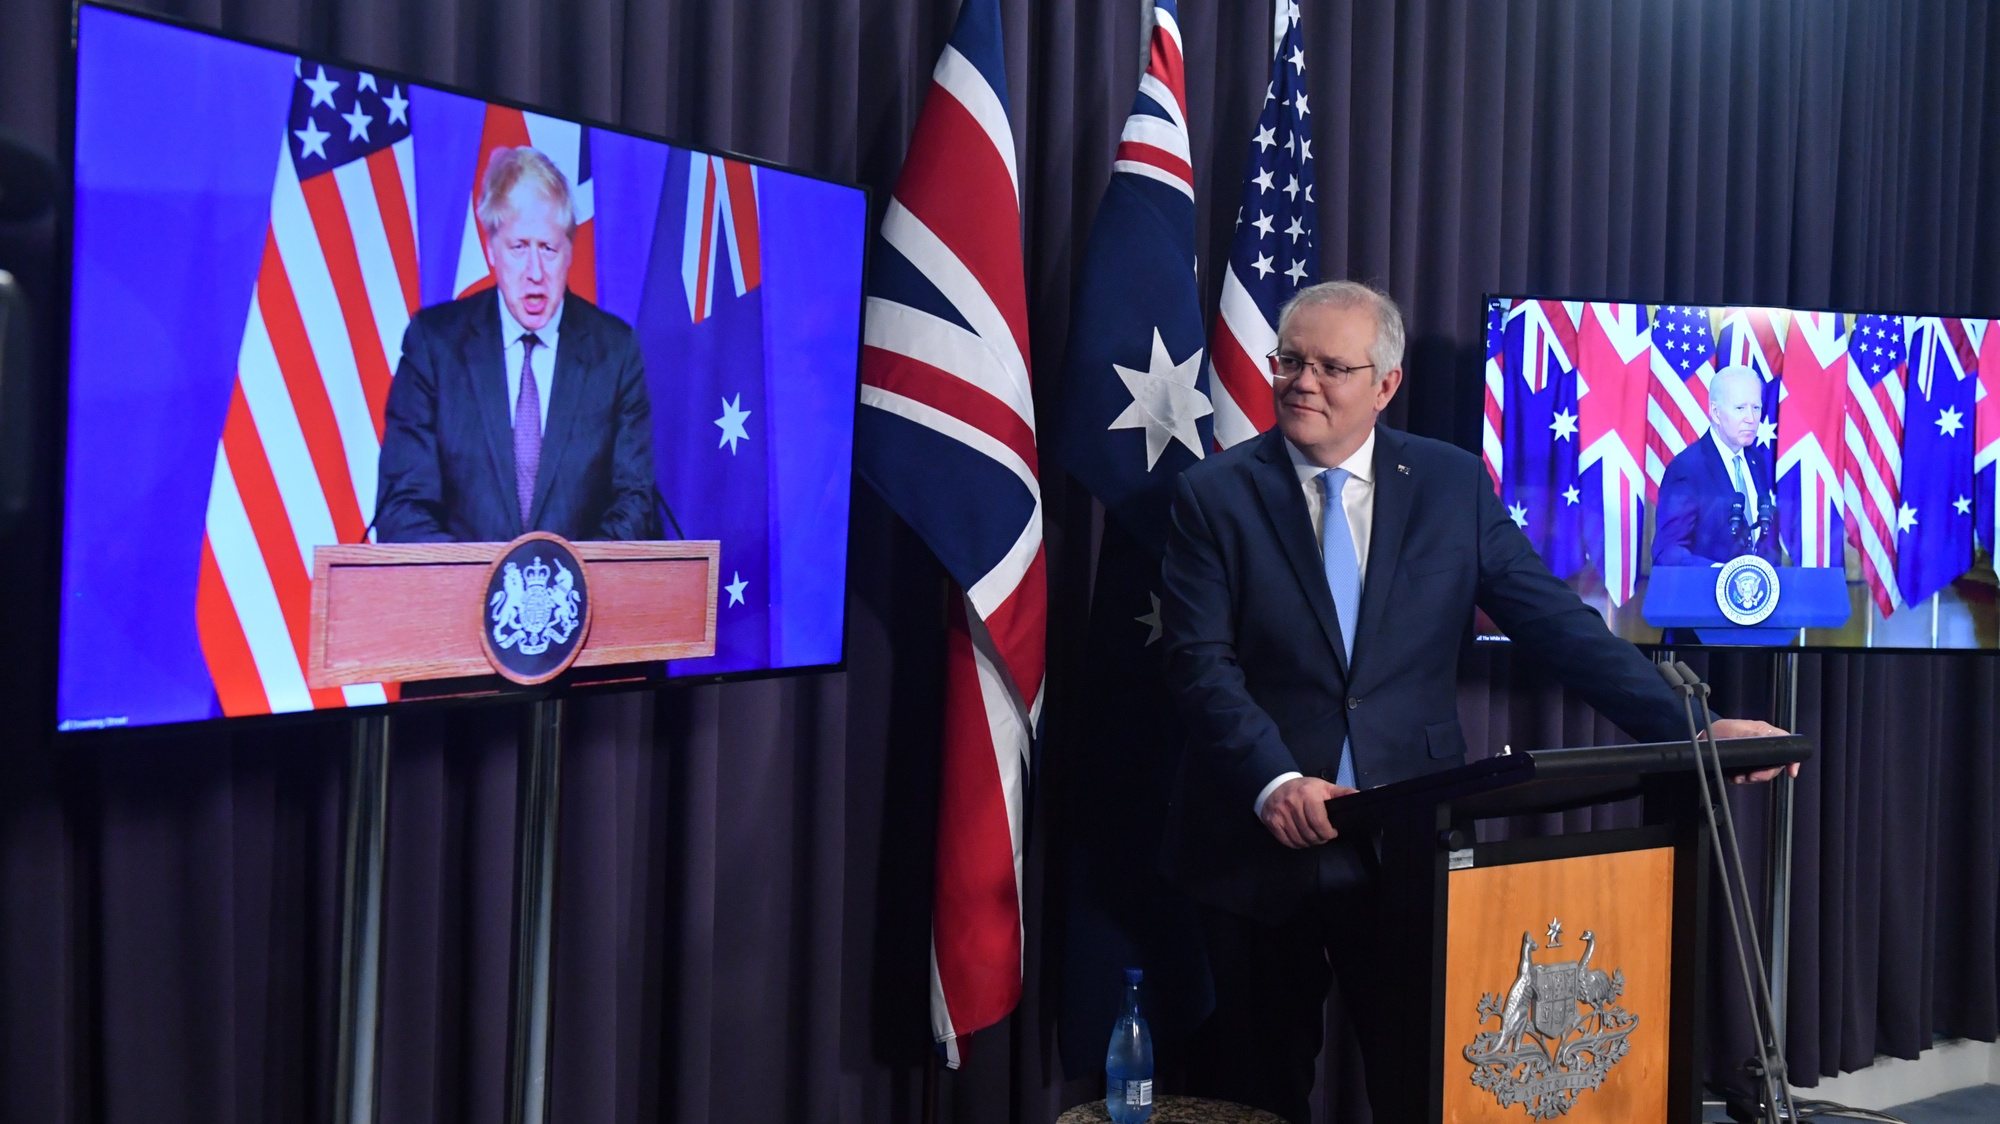 epa09470855 Britain&#039;s Prime Minister Boris Johnson, Australia&#039;s Prime Minister Scott Morrison (C) and US President Joe Biden attend a joint press conference via audio visual link (AVL) from The Blue Room at Parliament House in Canberra, Australian Capital Territory, Australia, 16 September 2021. Australia, the United Kingdom and the United States agreed to the creation of a trilateral security partnership to be known as AUKUS.  EPA/MICK TSIKAS AUSTRALIA AND NEW ZEALAND OUT